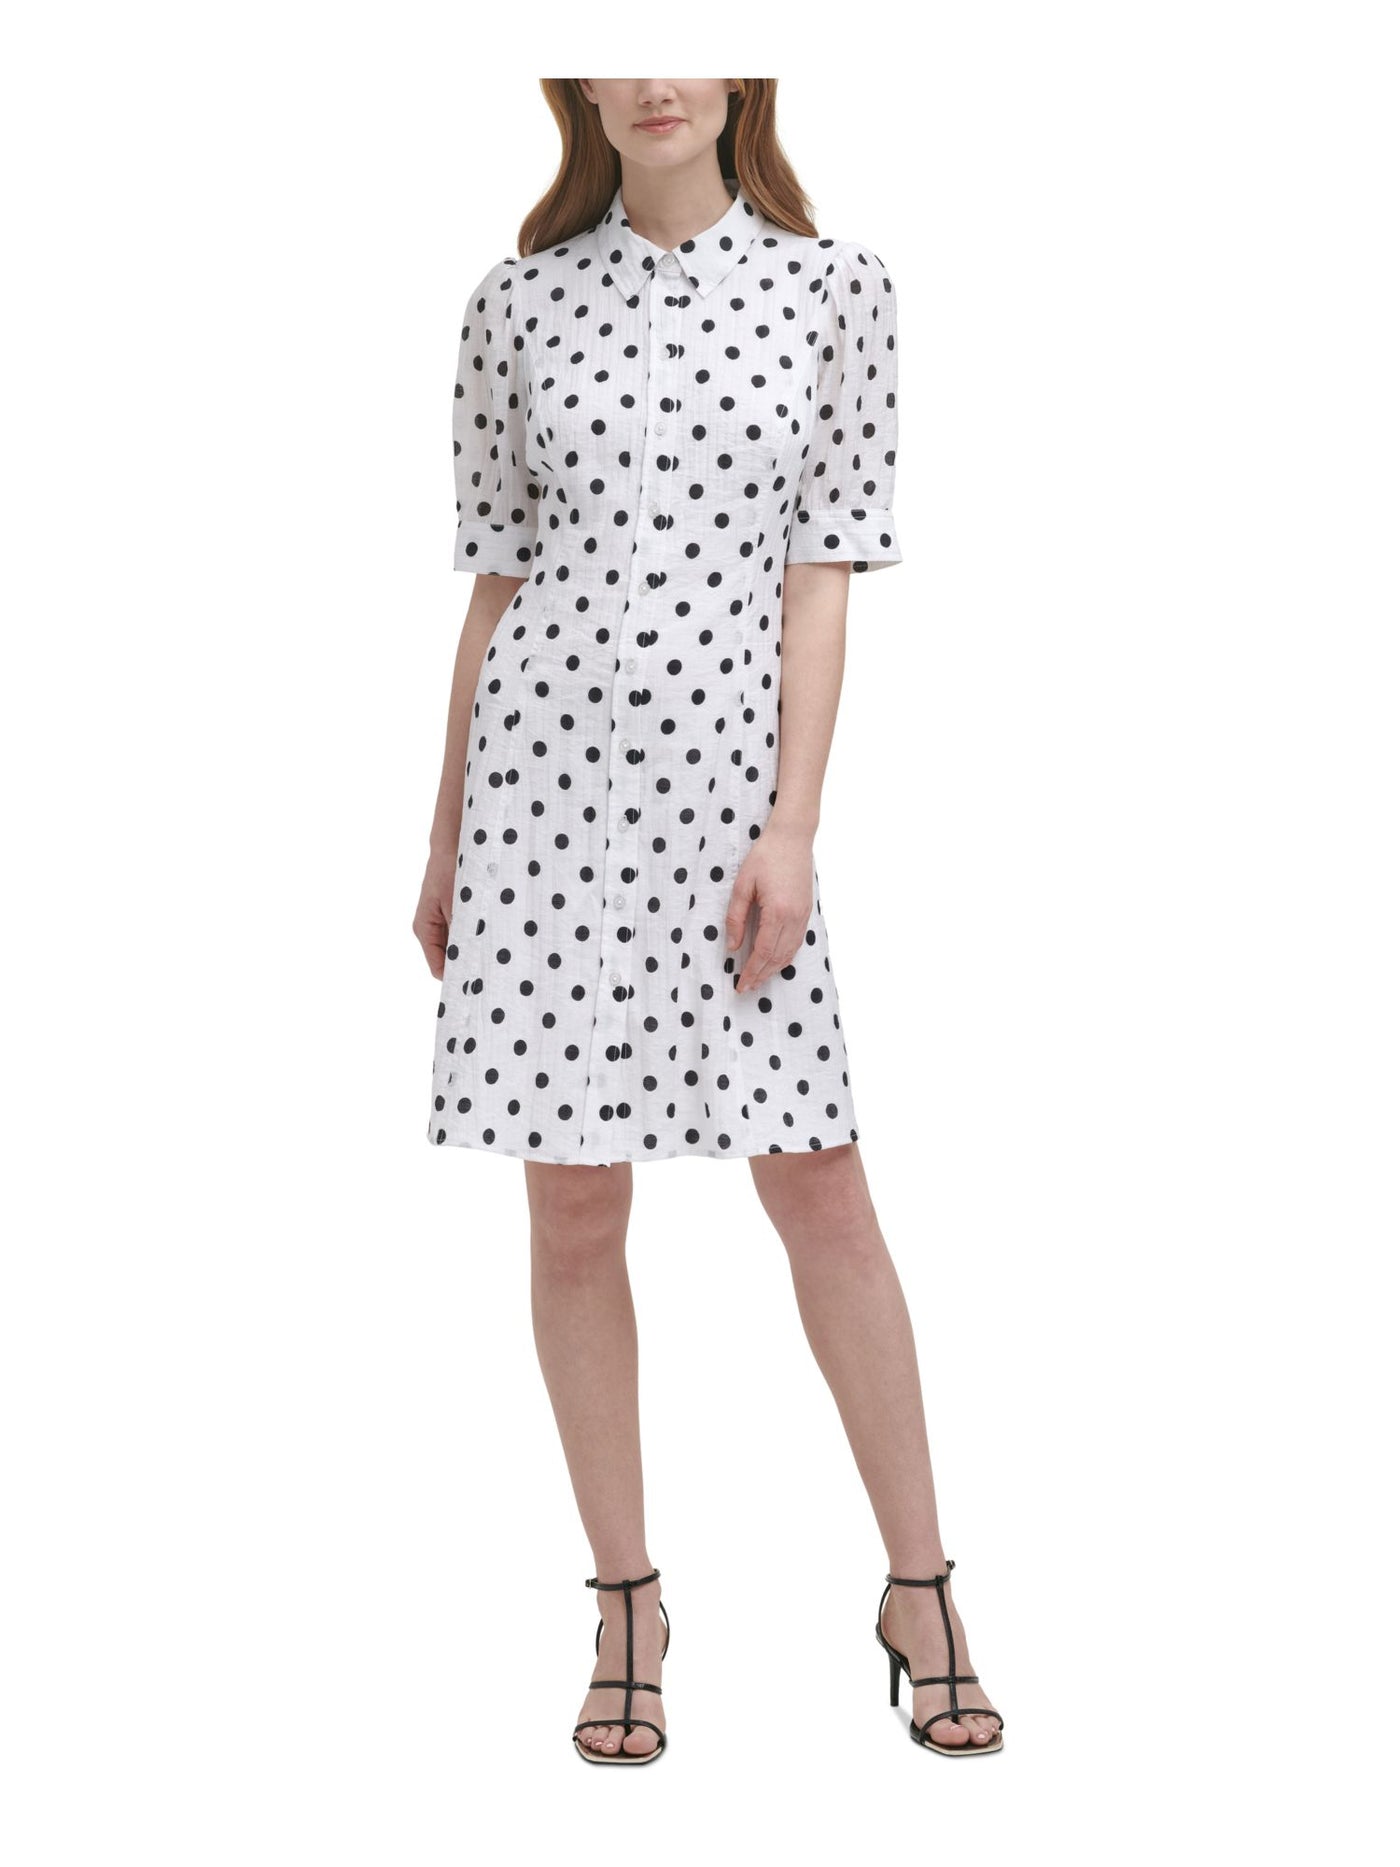 DKNY Womens Ivory Fitted Button Front Lined Polka Dot Elbow Sleeve Collared Above The Knee Wear To Work Shirt Dress 2